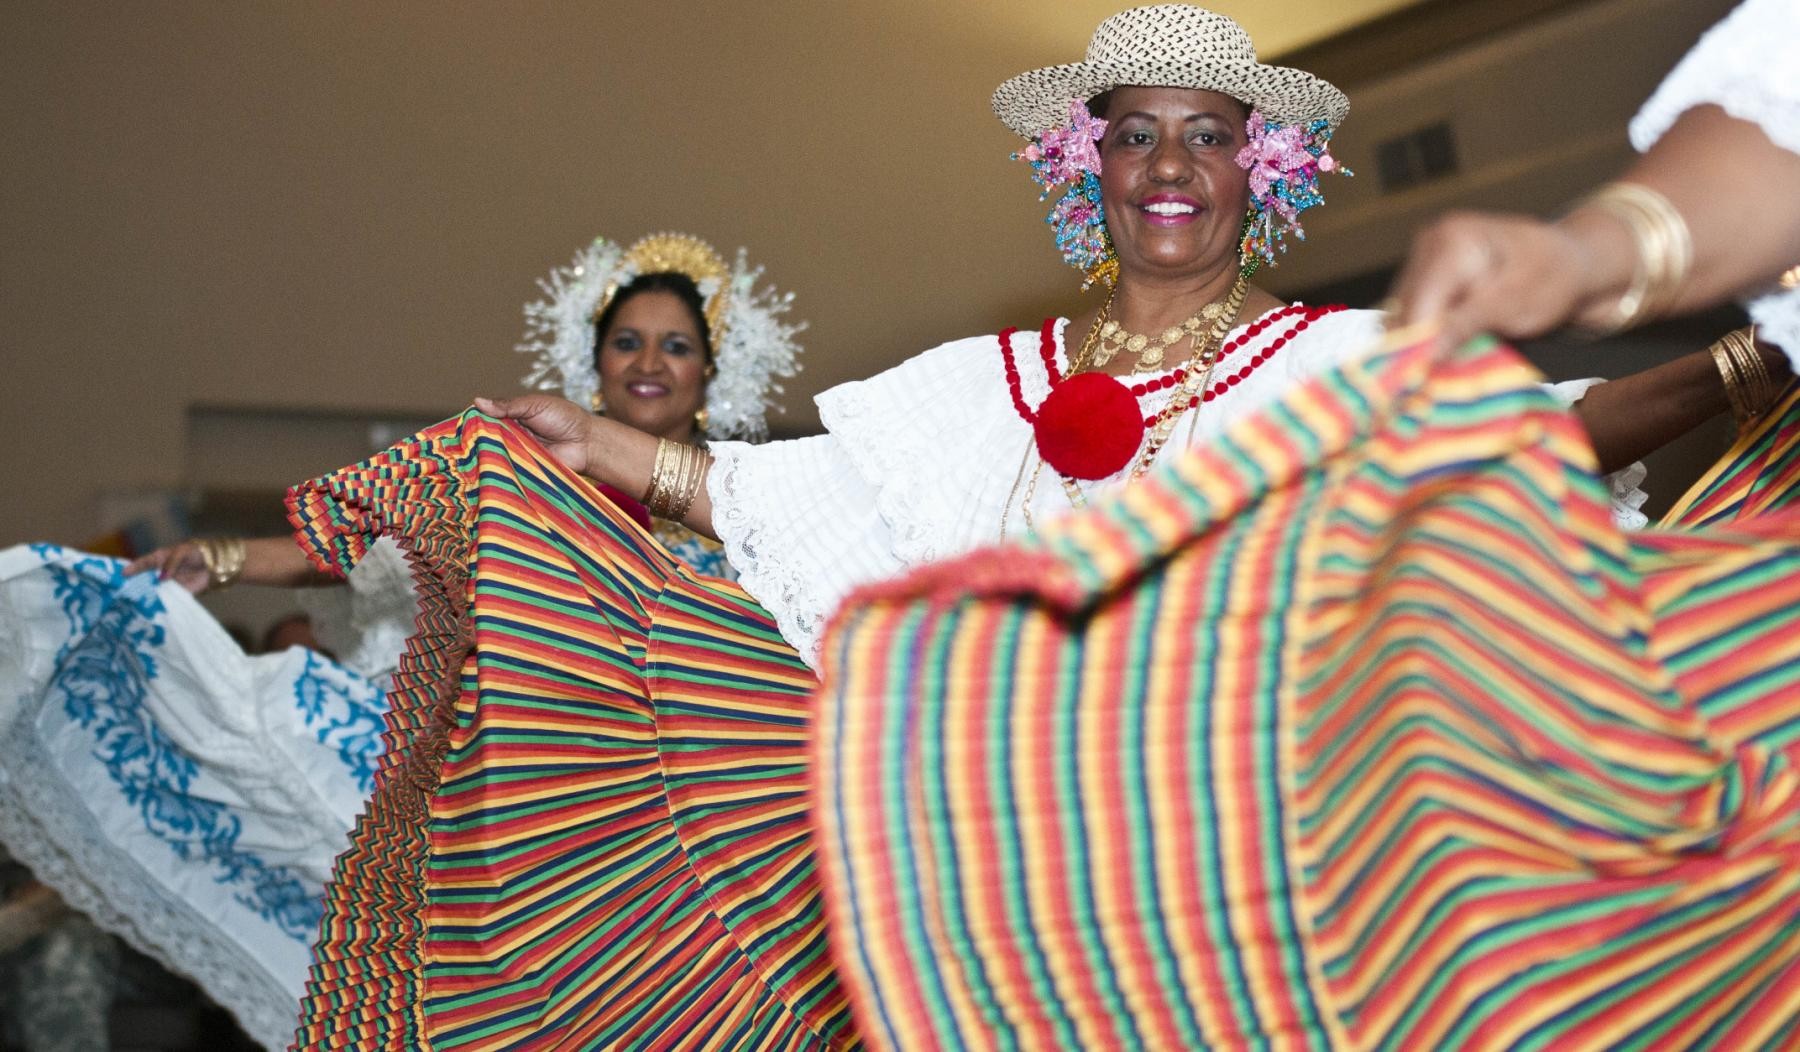 Cav hosts Hispanic Heritage remembrance | Article | The United States Army